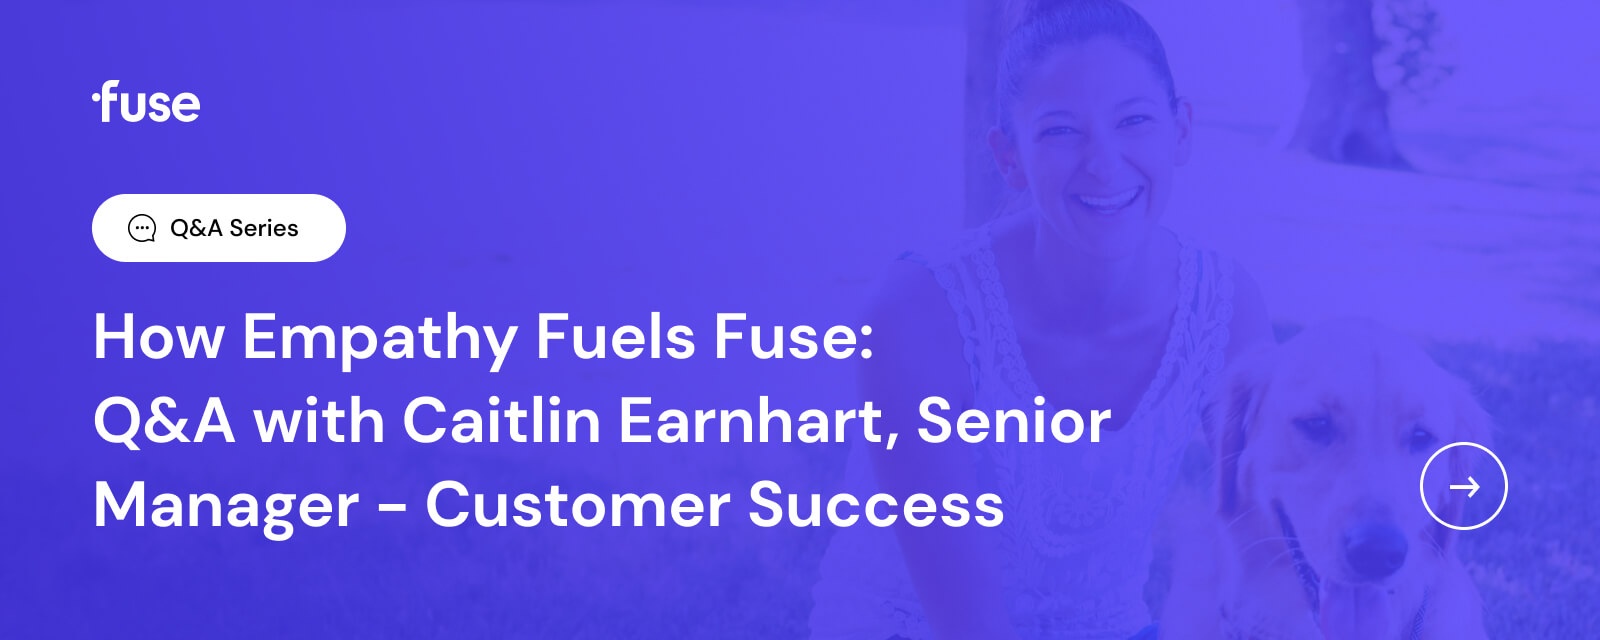 Related Read - How Empathy Fuels Fuse: Q&A with Caitlin Earnhart, Senior Manager - Customer Success